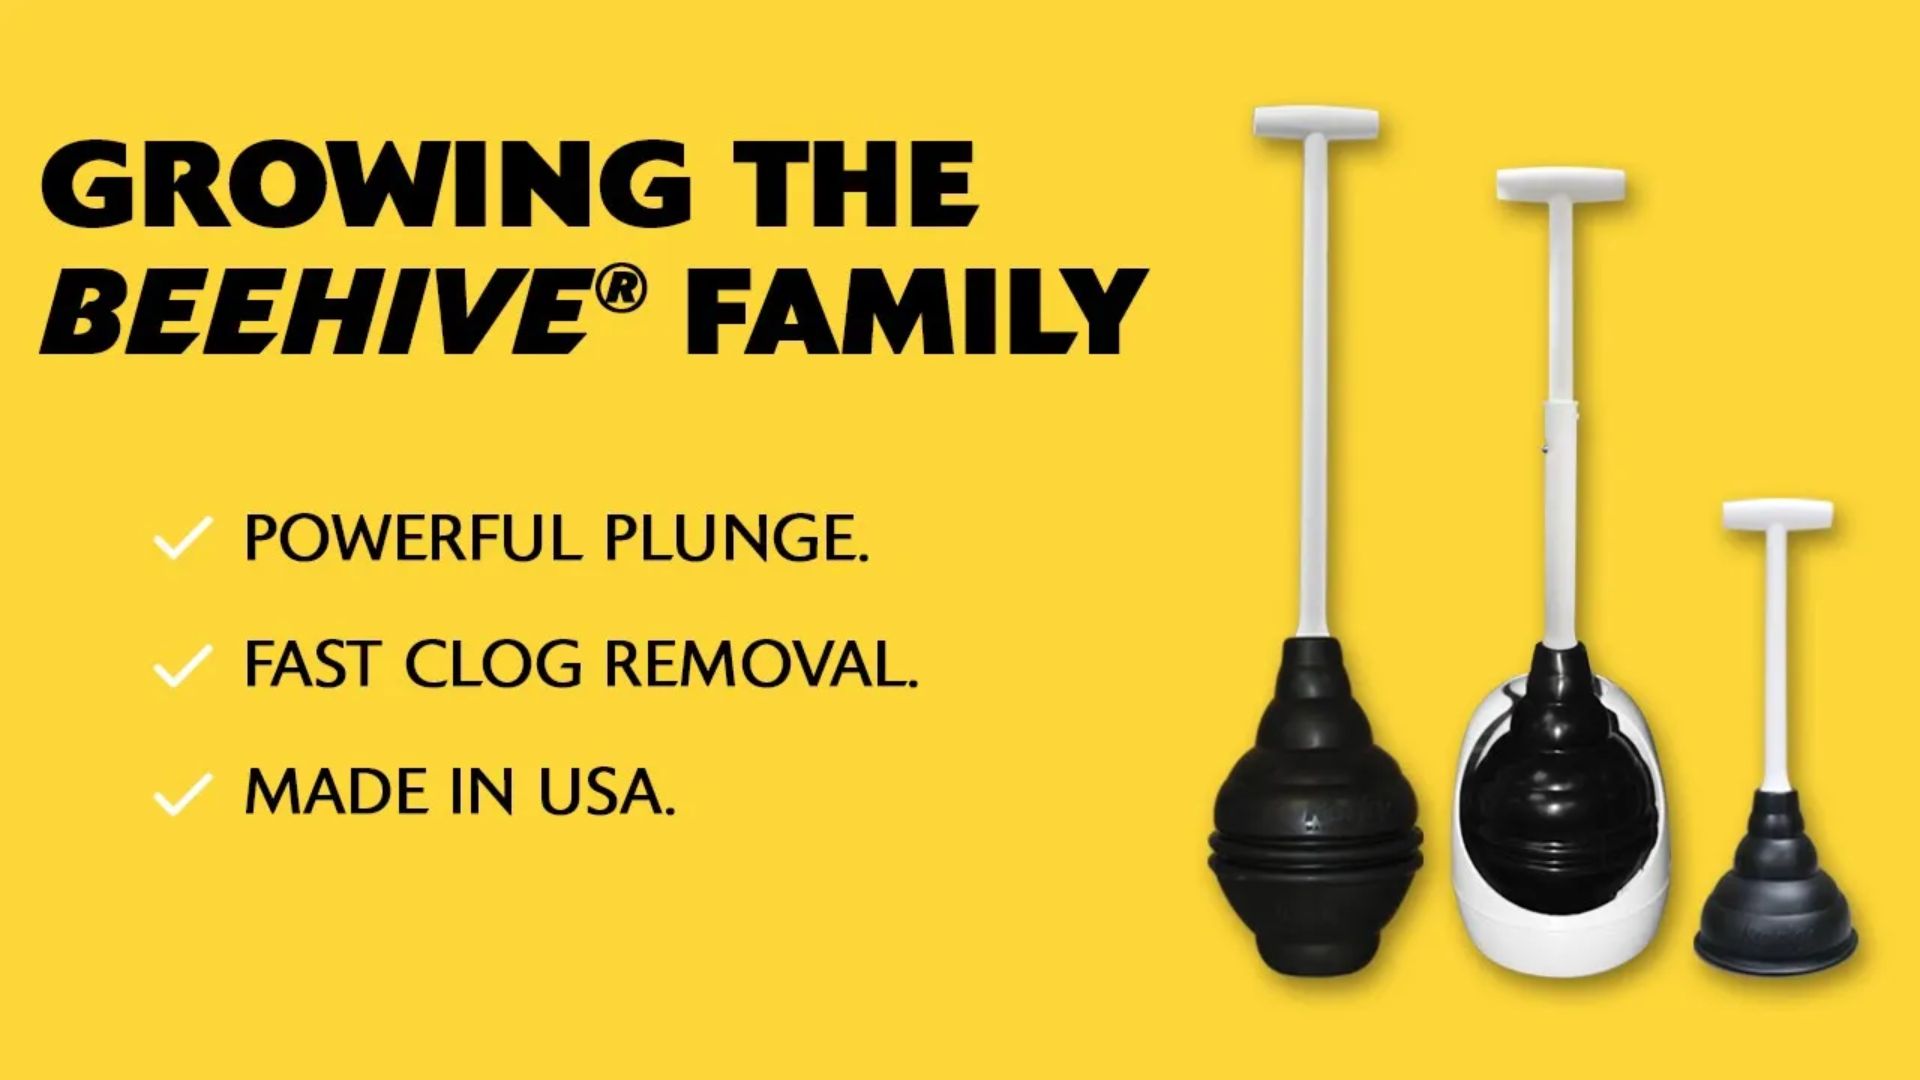 Find the right plunger for any clog